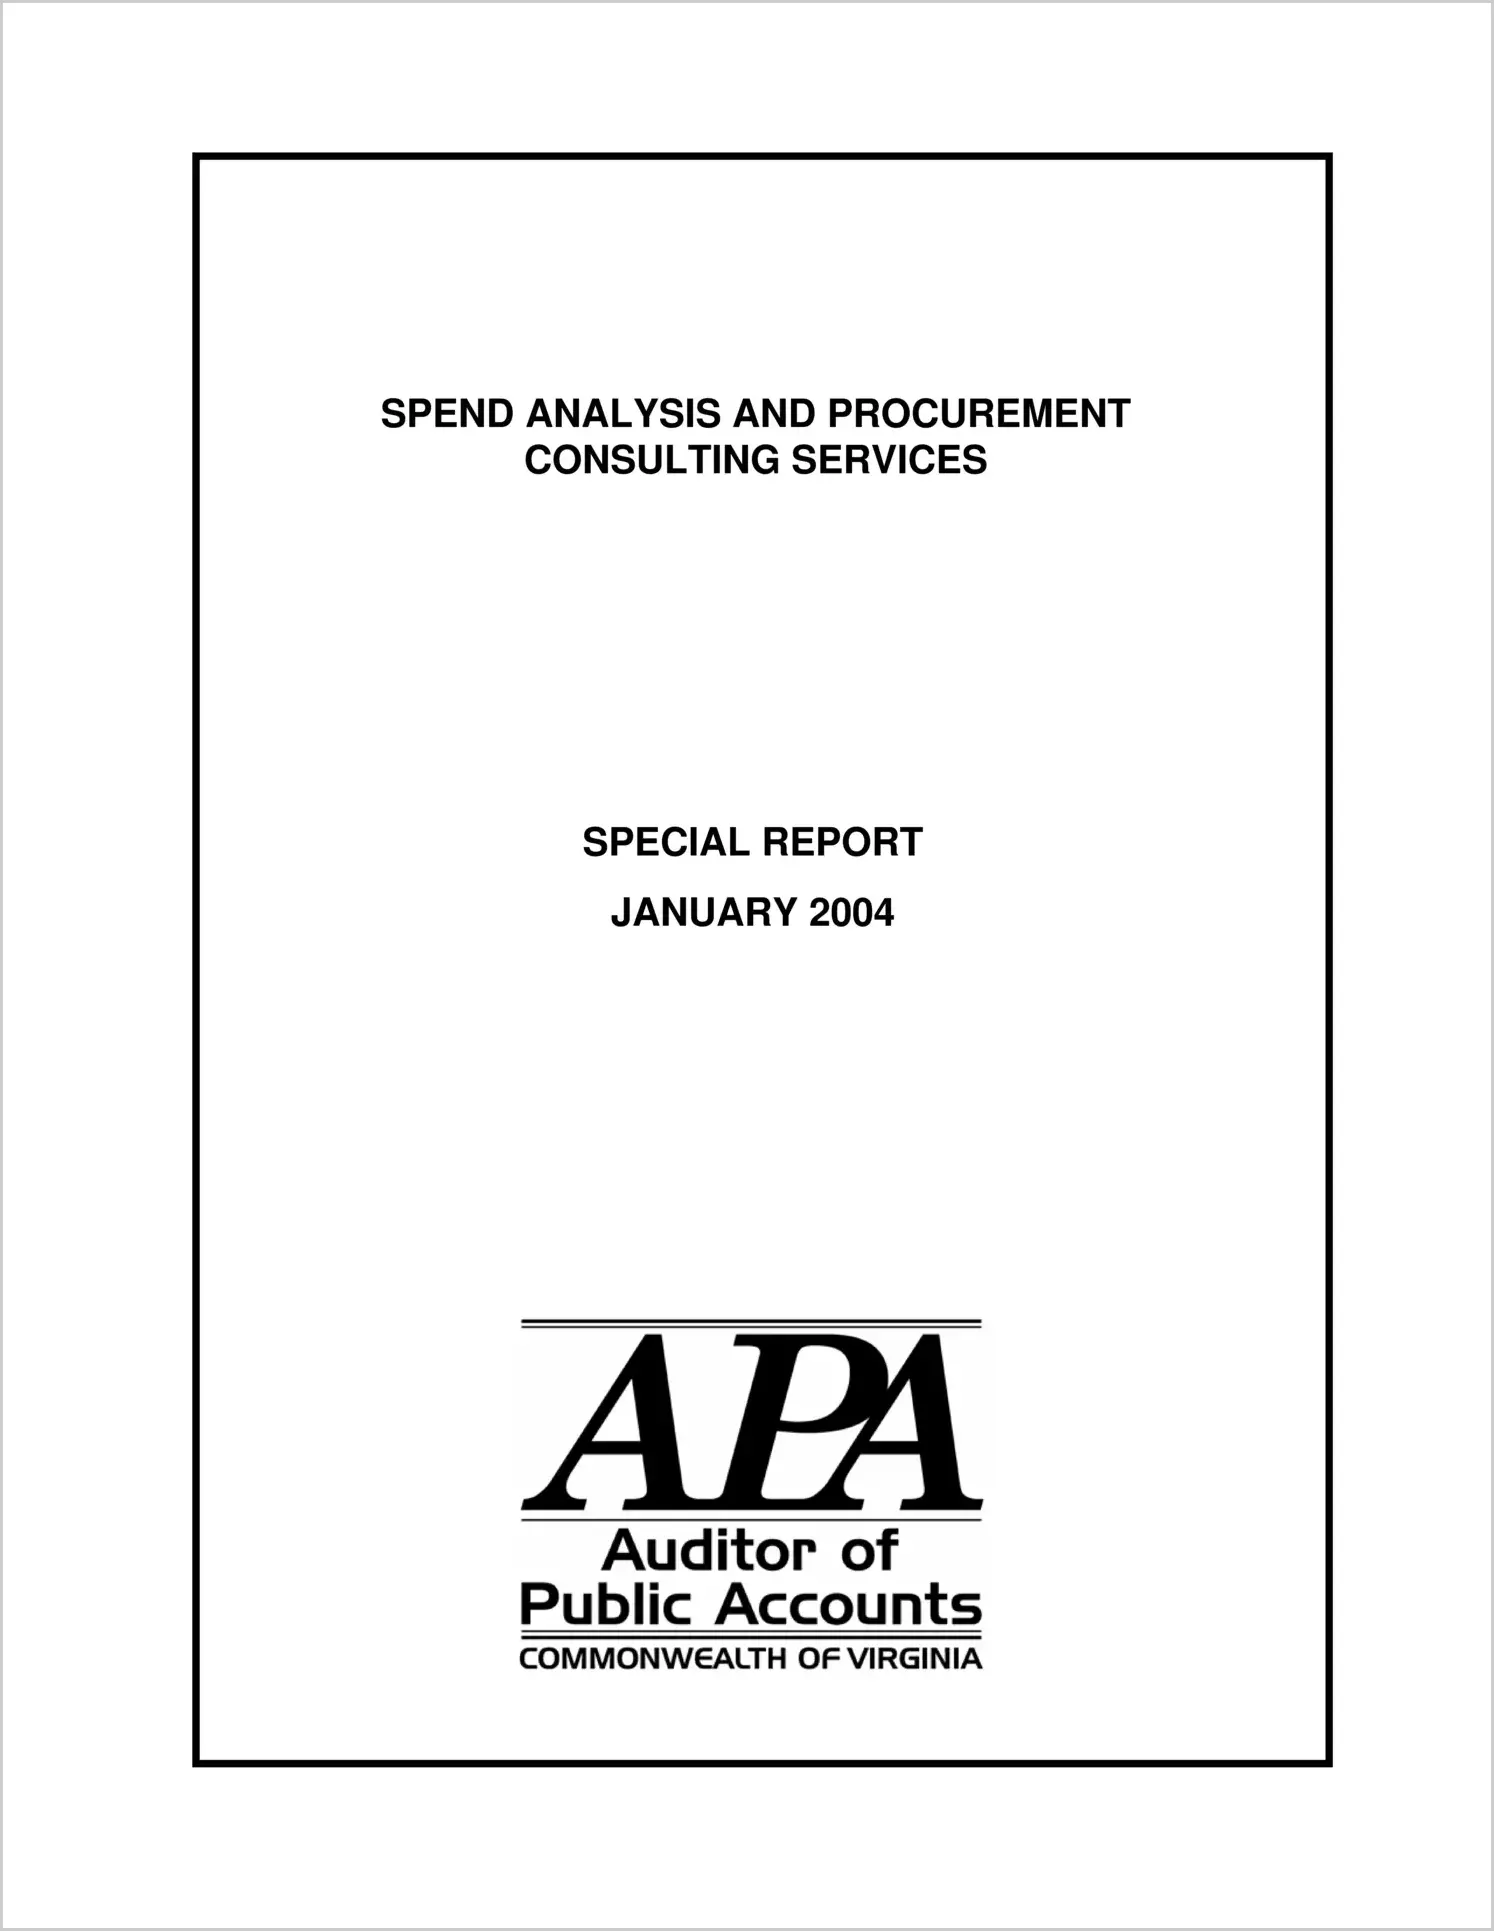 Special ReportSpend Analysis and Procurement Consulting Services(Report Date: January 2004)